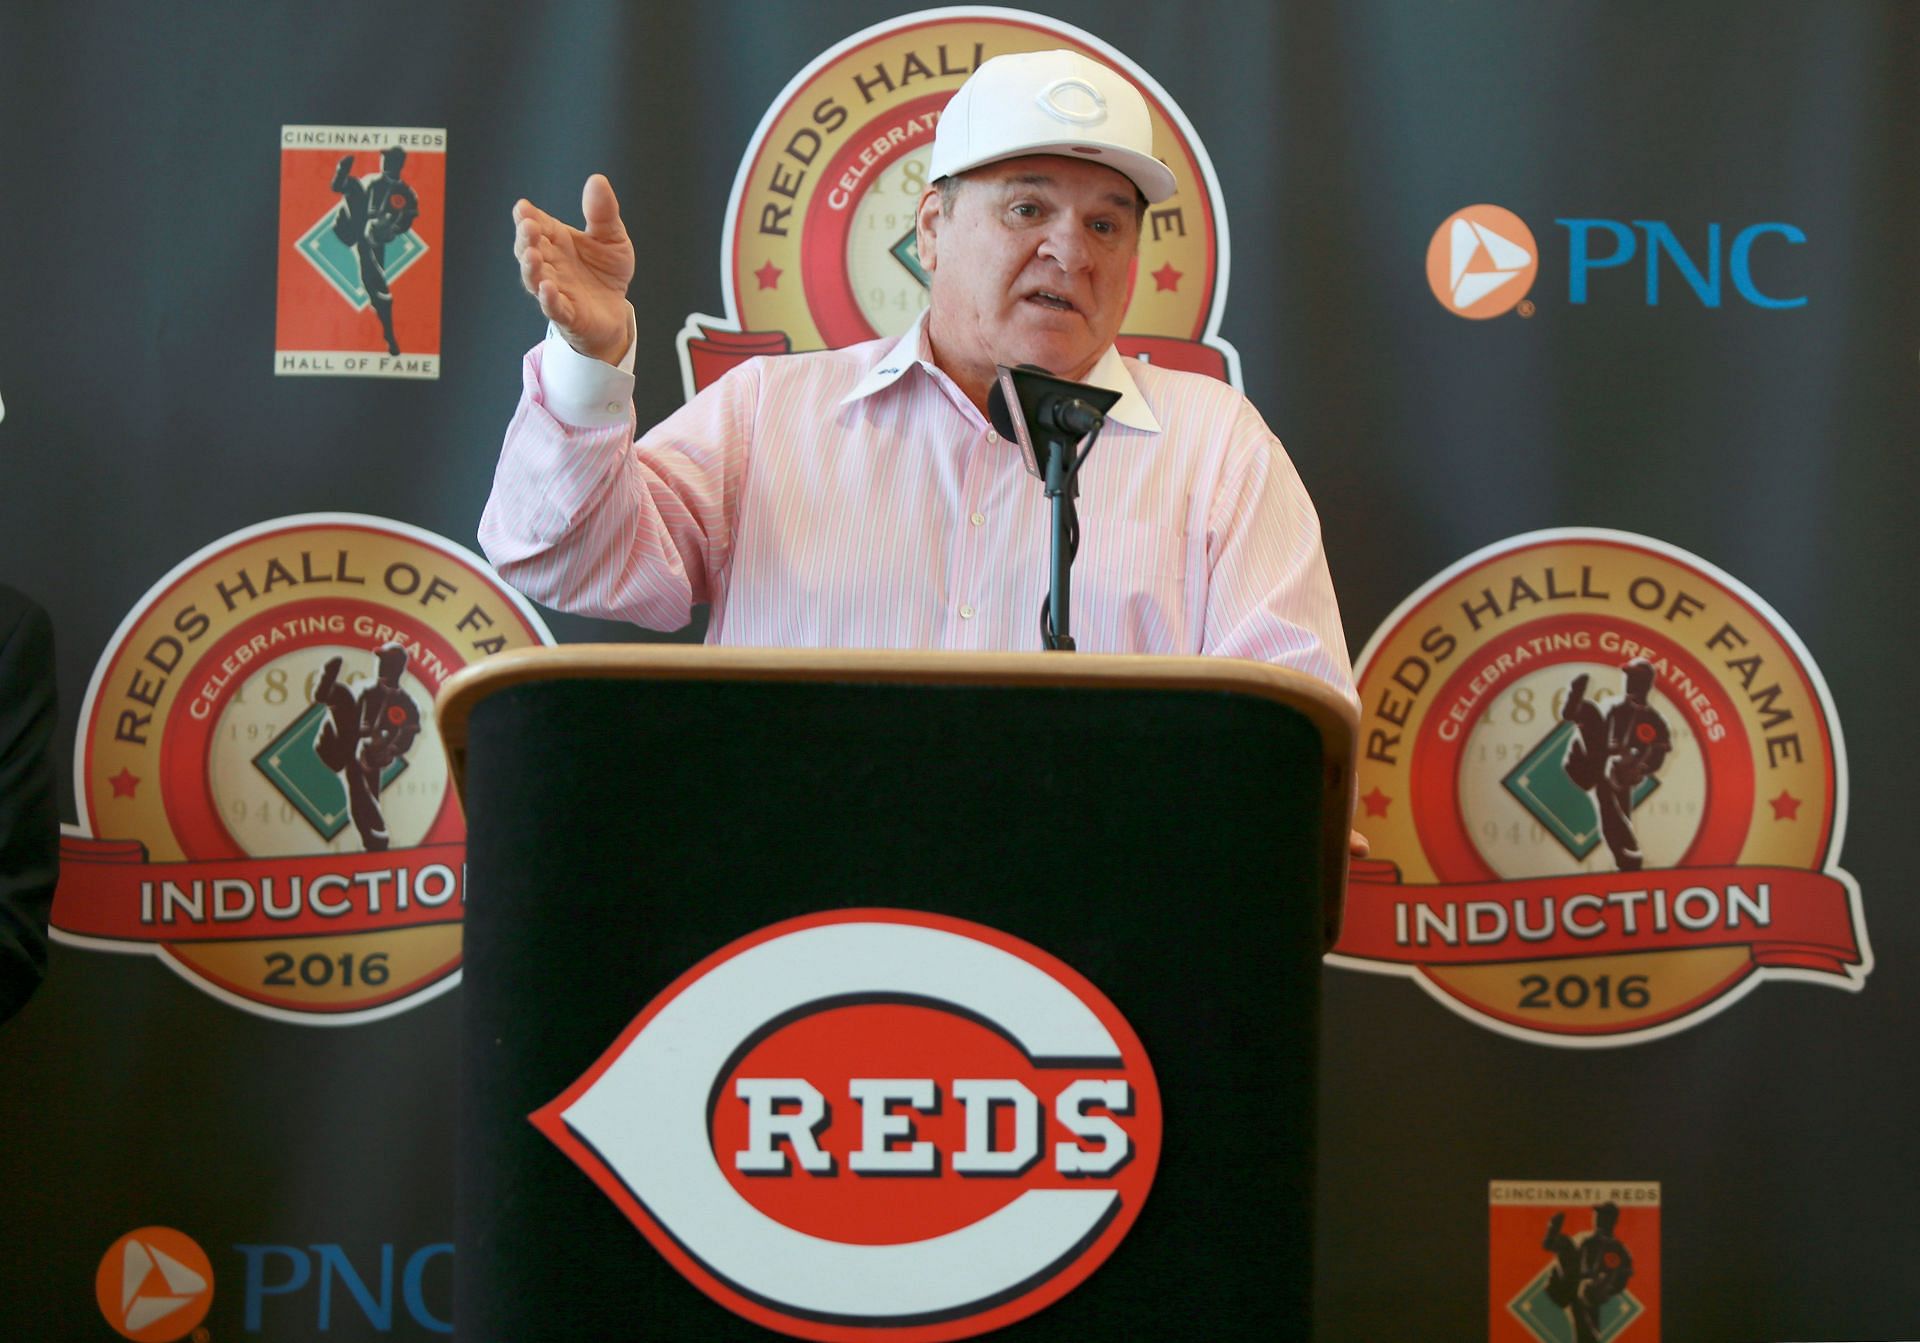 Rose added to Reds' Hall of Fame 